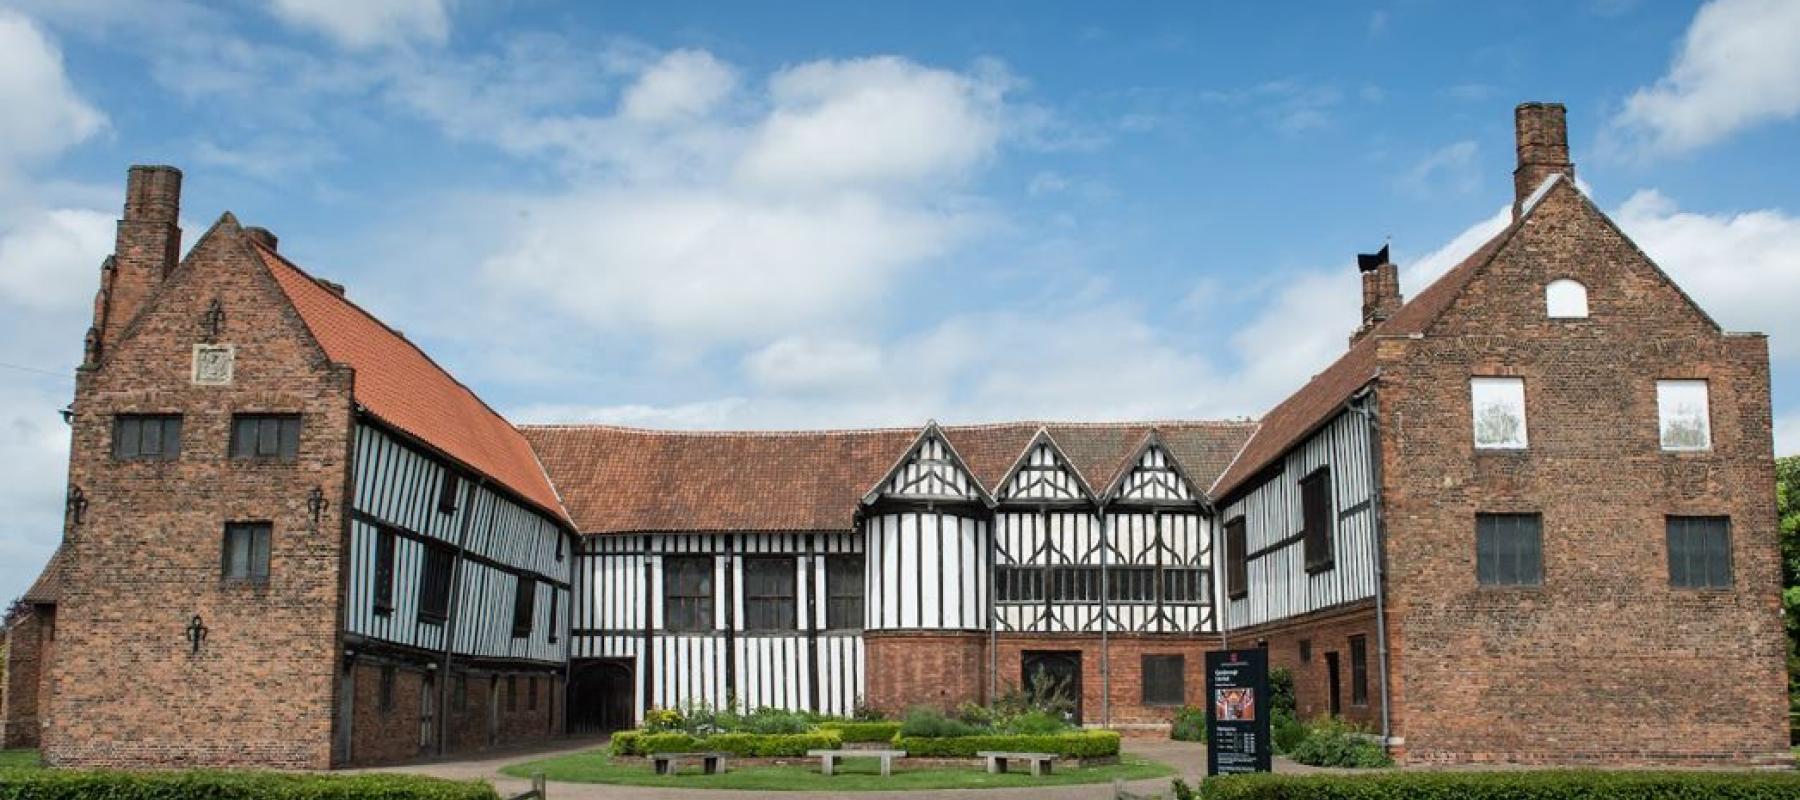 Gainsborough Old Hall in Lincolnshire